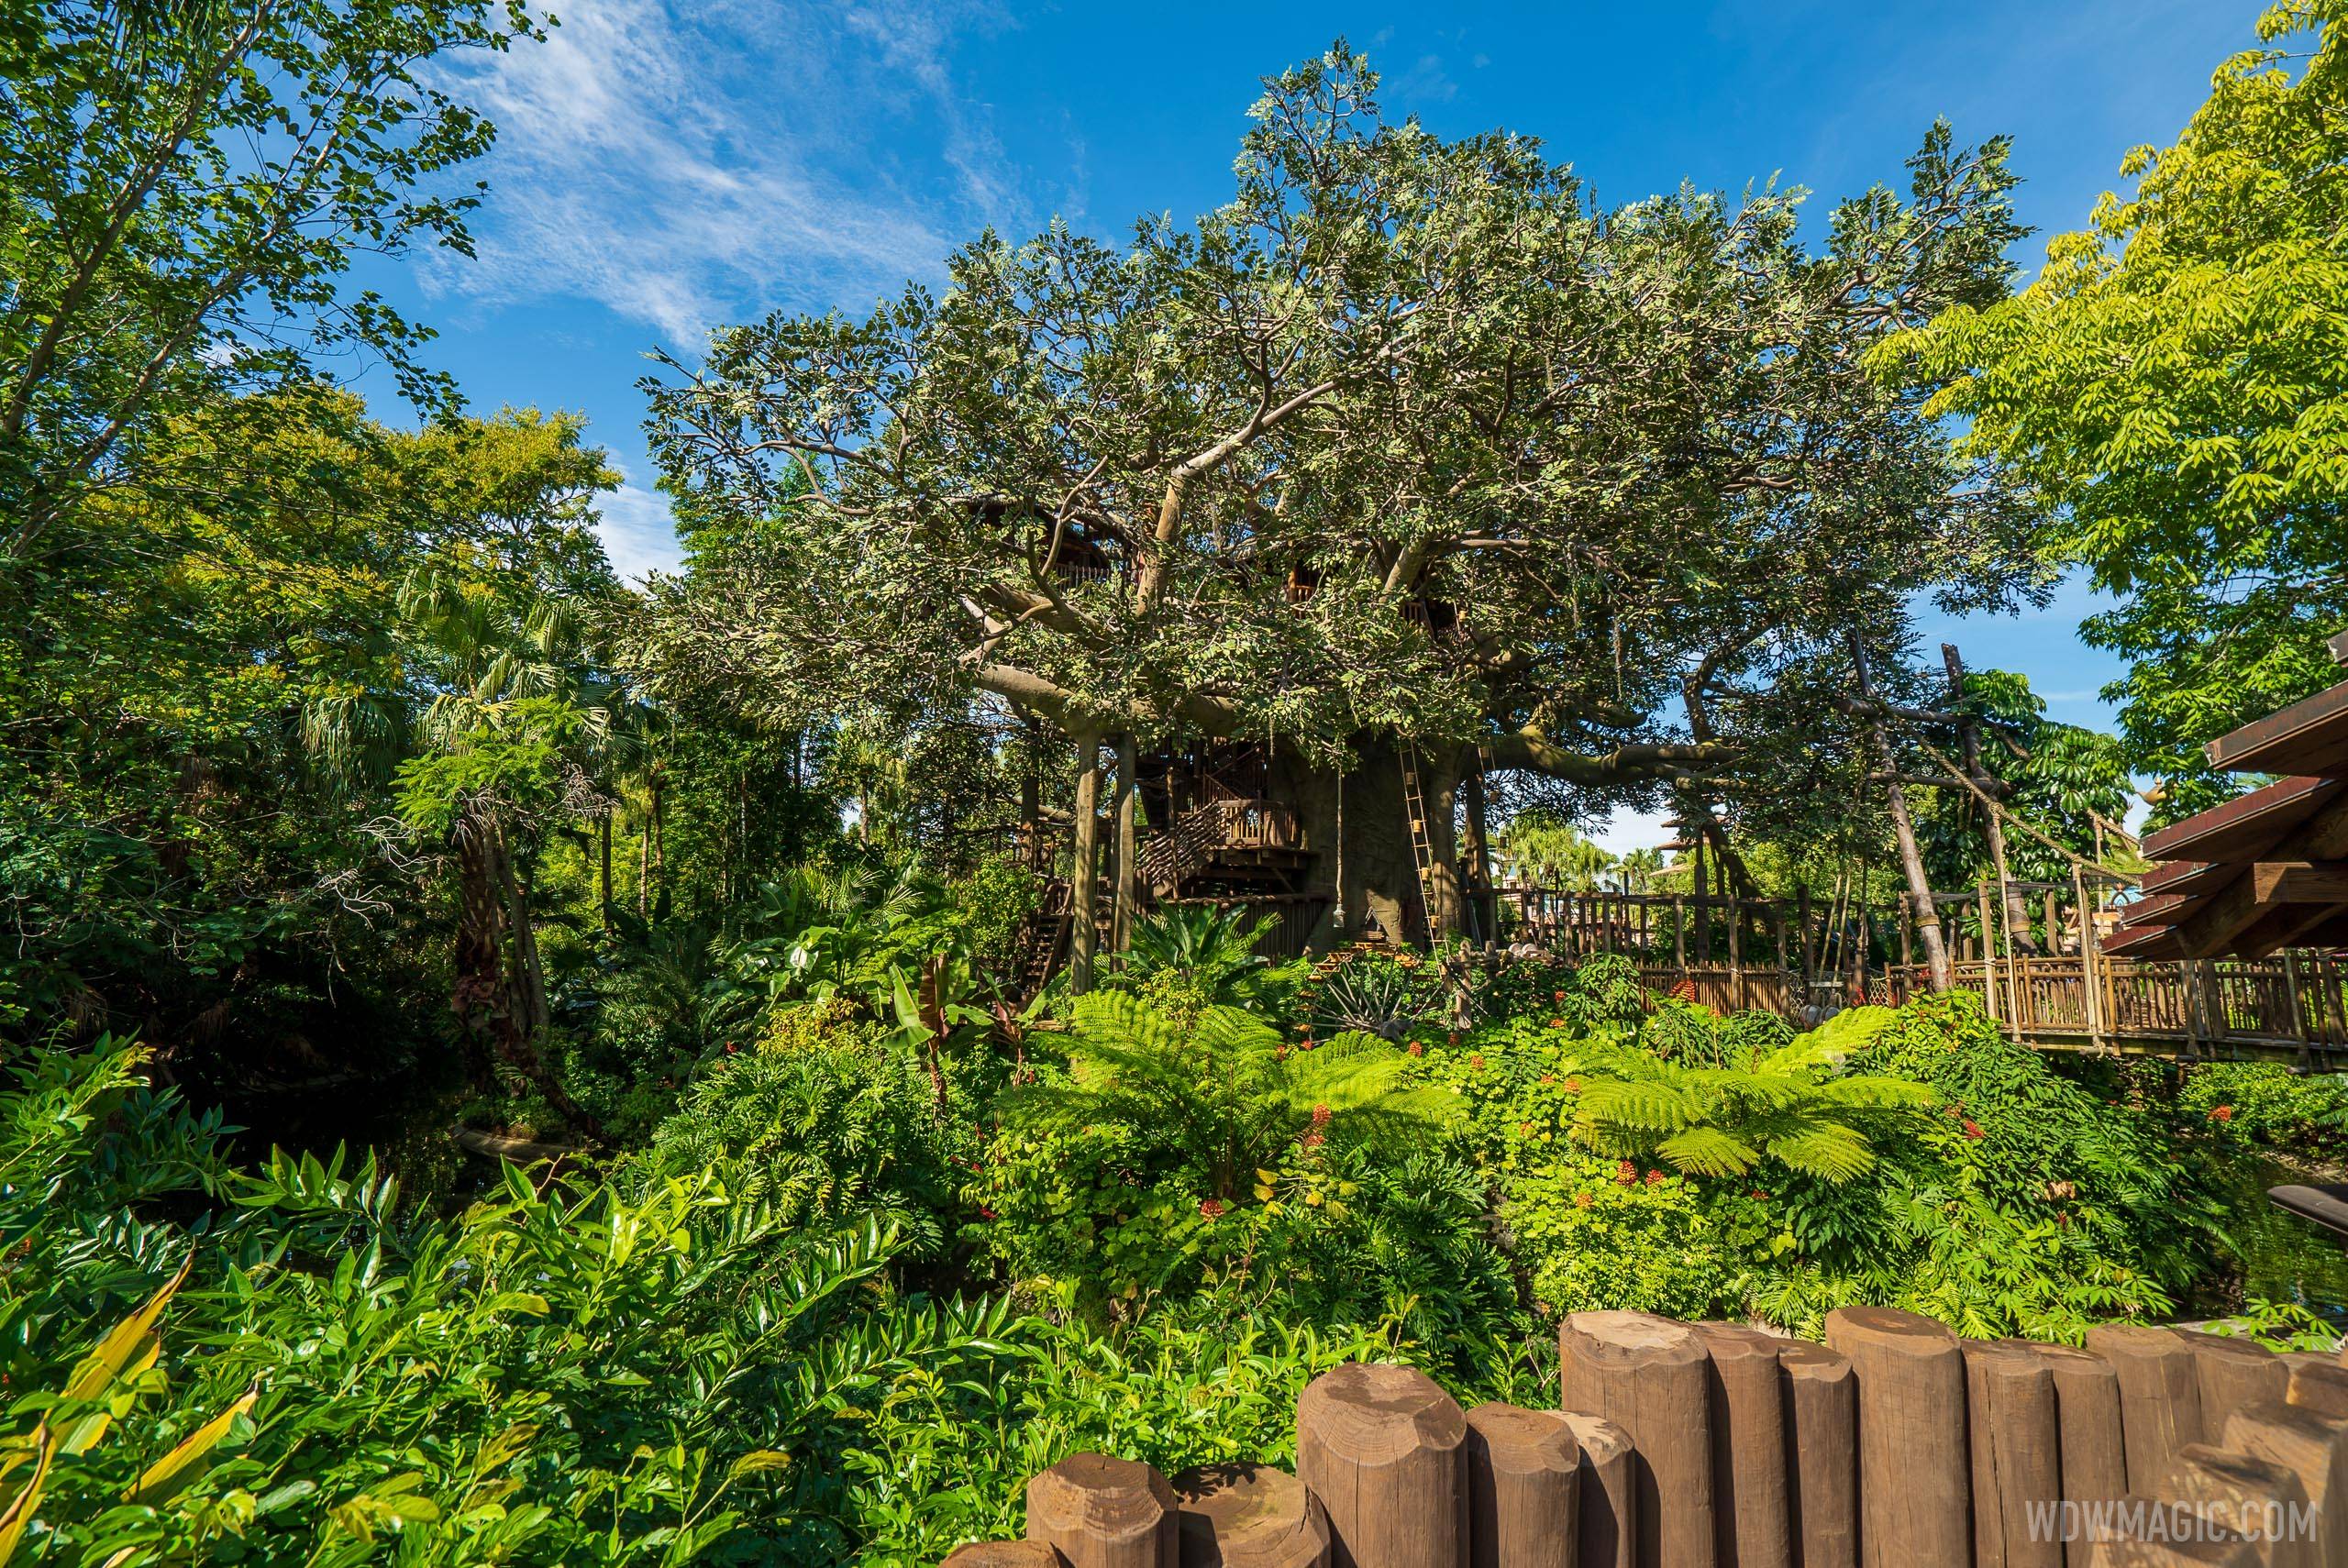 The Swiss Family Treehouse closing for refurbishment later this month